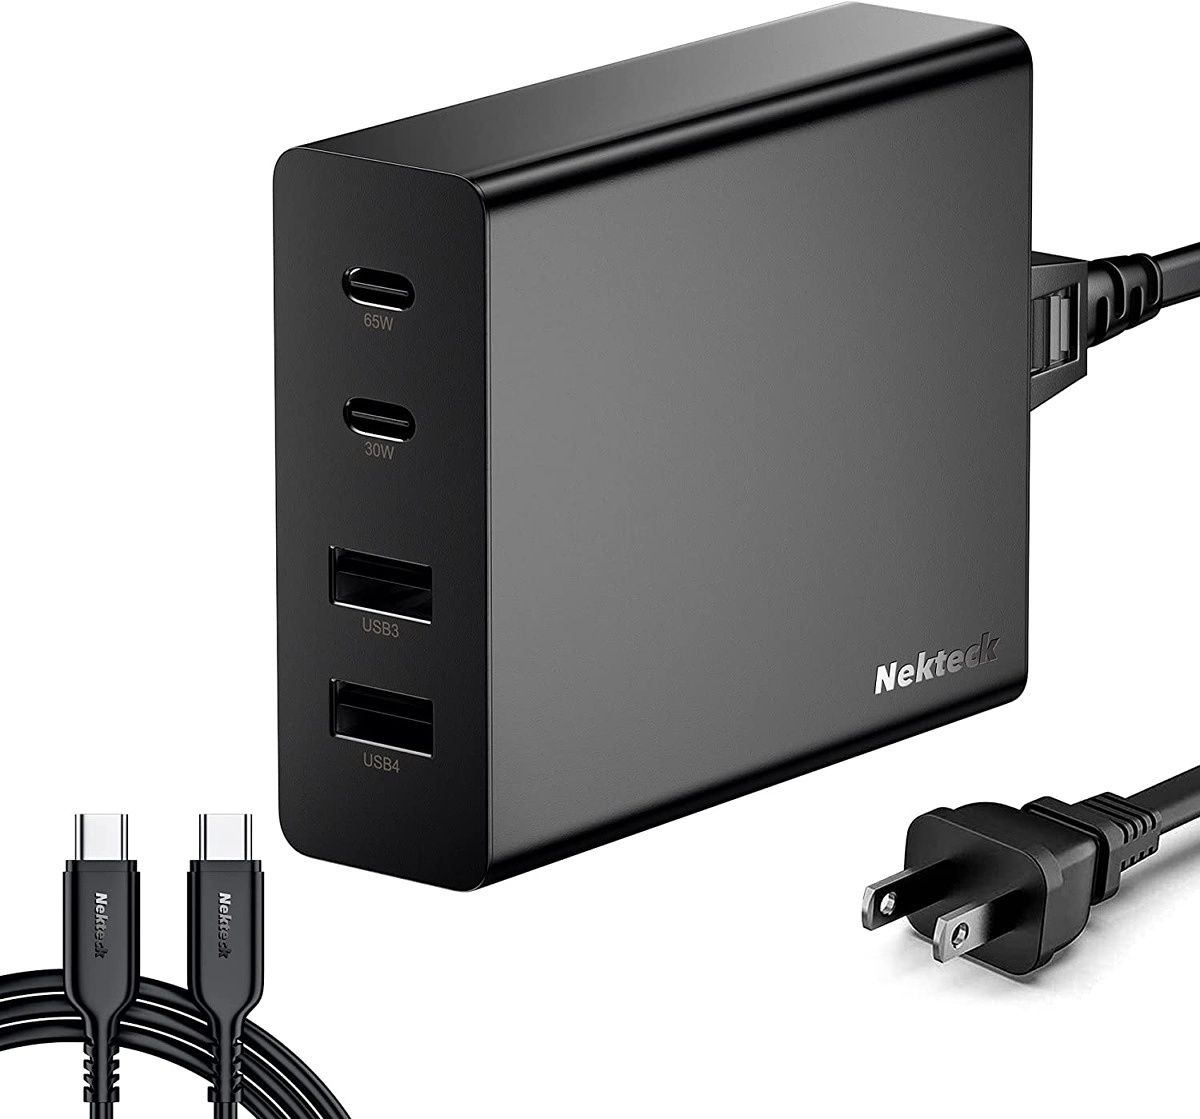 The Nektech 107W USB C charger is a good option to charge multiple devices simultaneously. It comes with two Type-C and two Type-A ports. While one of the ports offers 65W power delivery, which is perfect for the Surface Pro X, the other Type-C port can deliver 30W power. In addition, it comes with a bundled Type-C to Type-C cable.